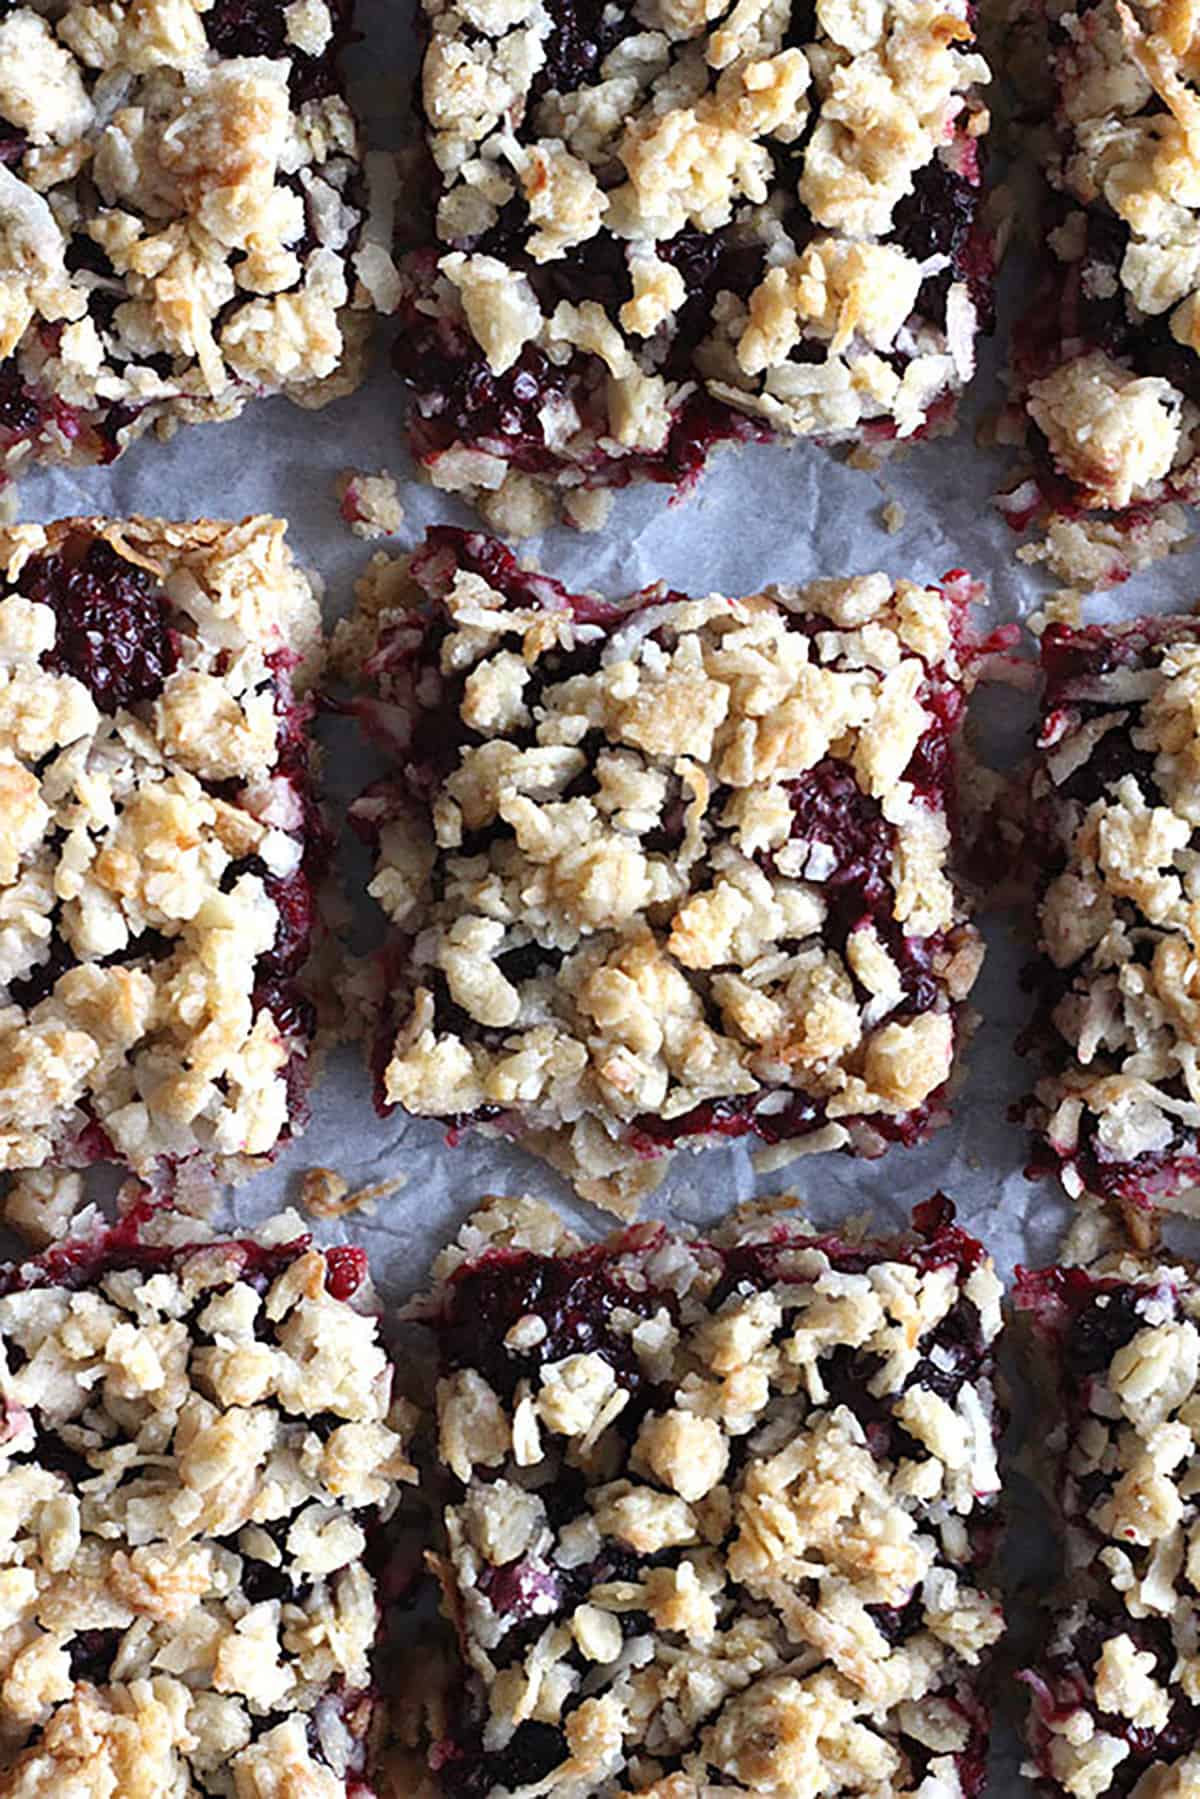 Freshly sliced Blackberry crumble bars served on parchment paper.